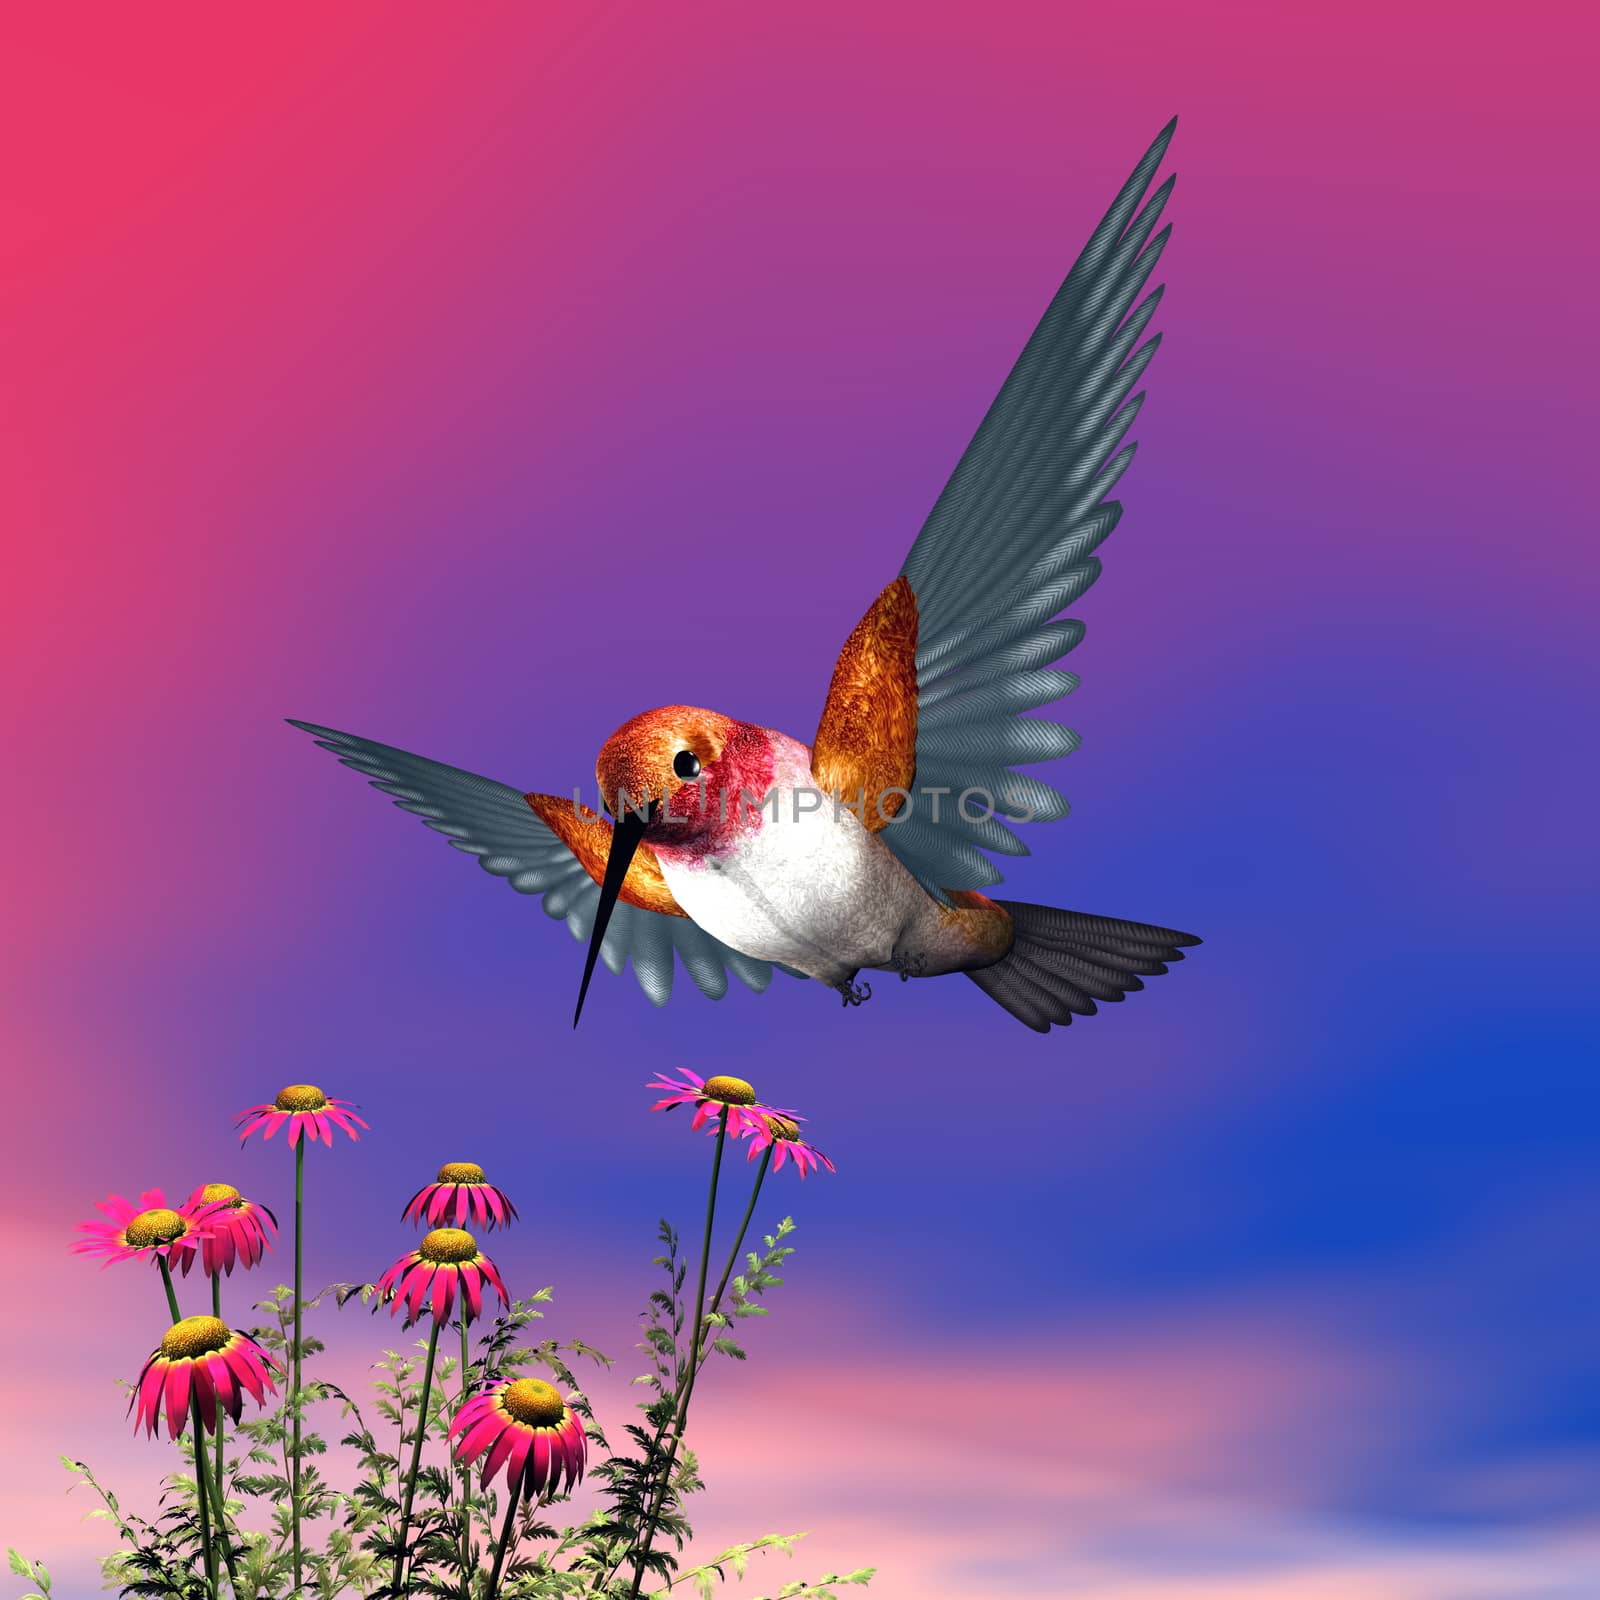 Rufous hummingbird flying upon red daisies by cloudy day - 3D render